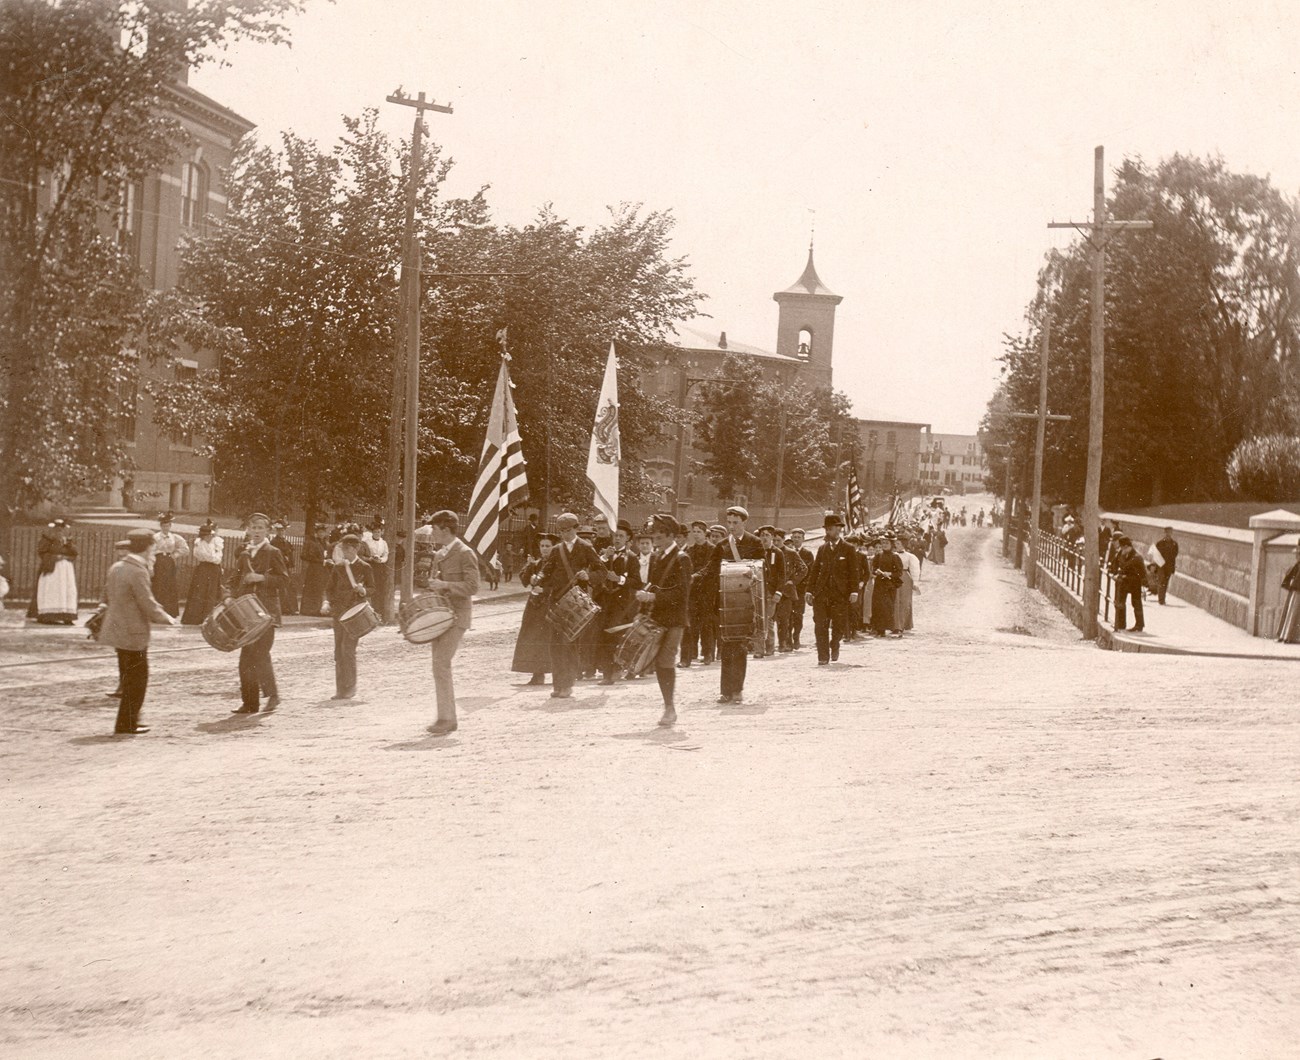 Parade walking down street with Whitin Machine Works in background